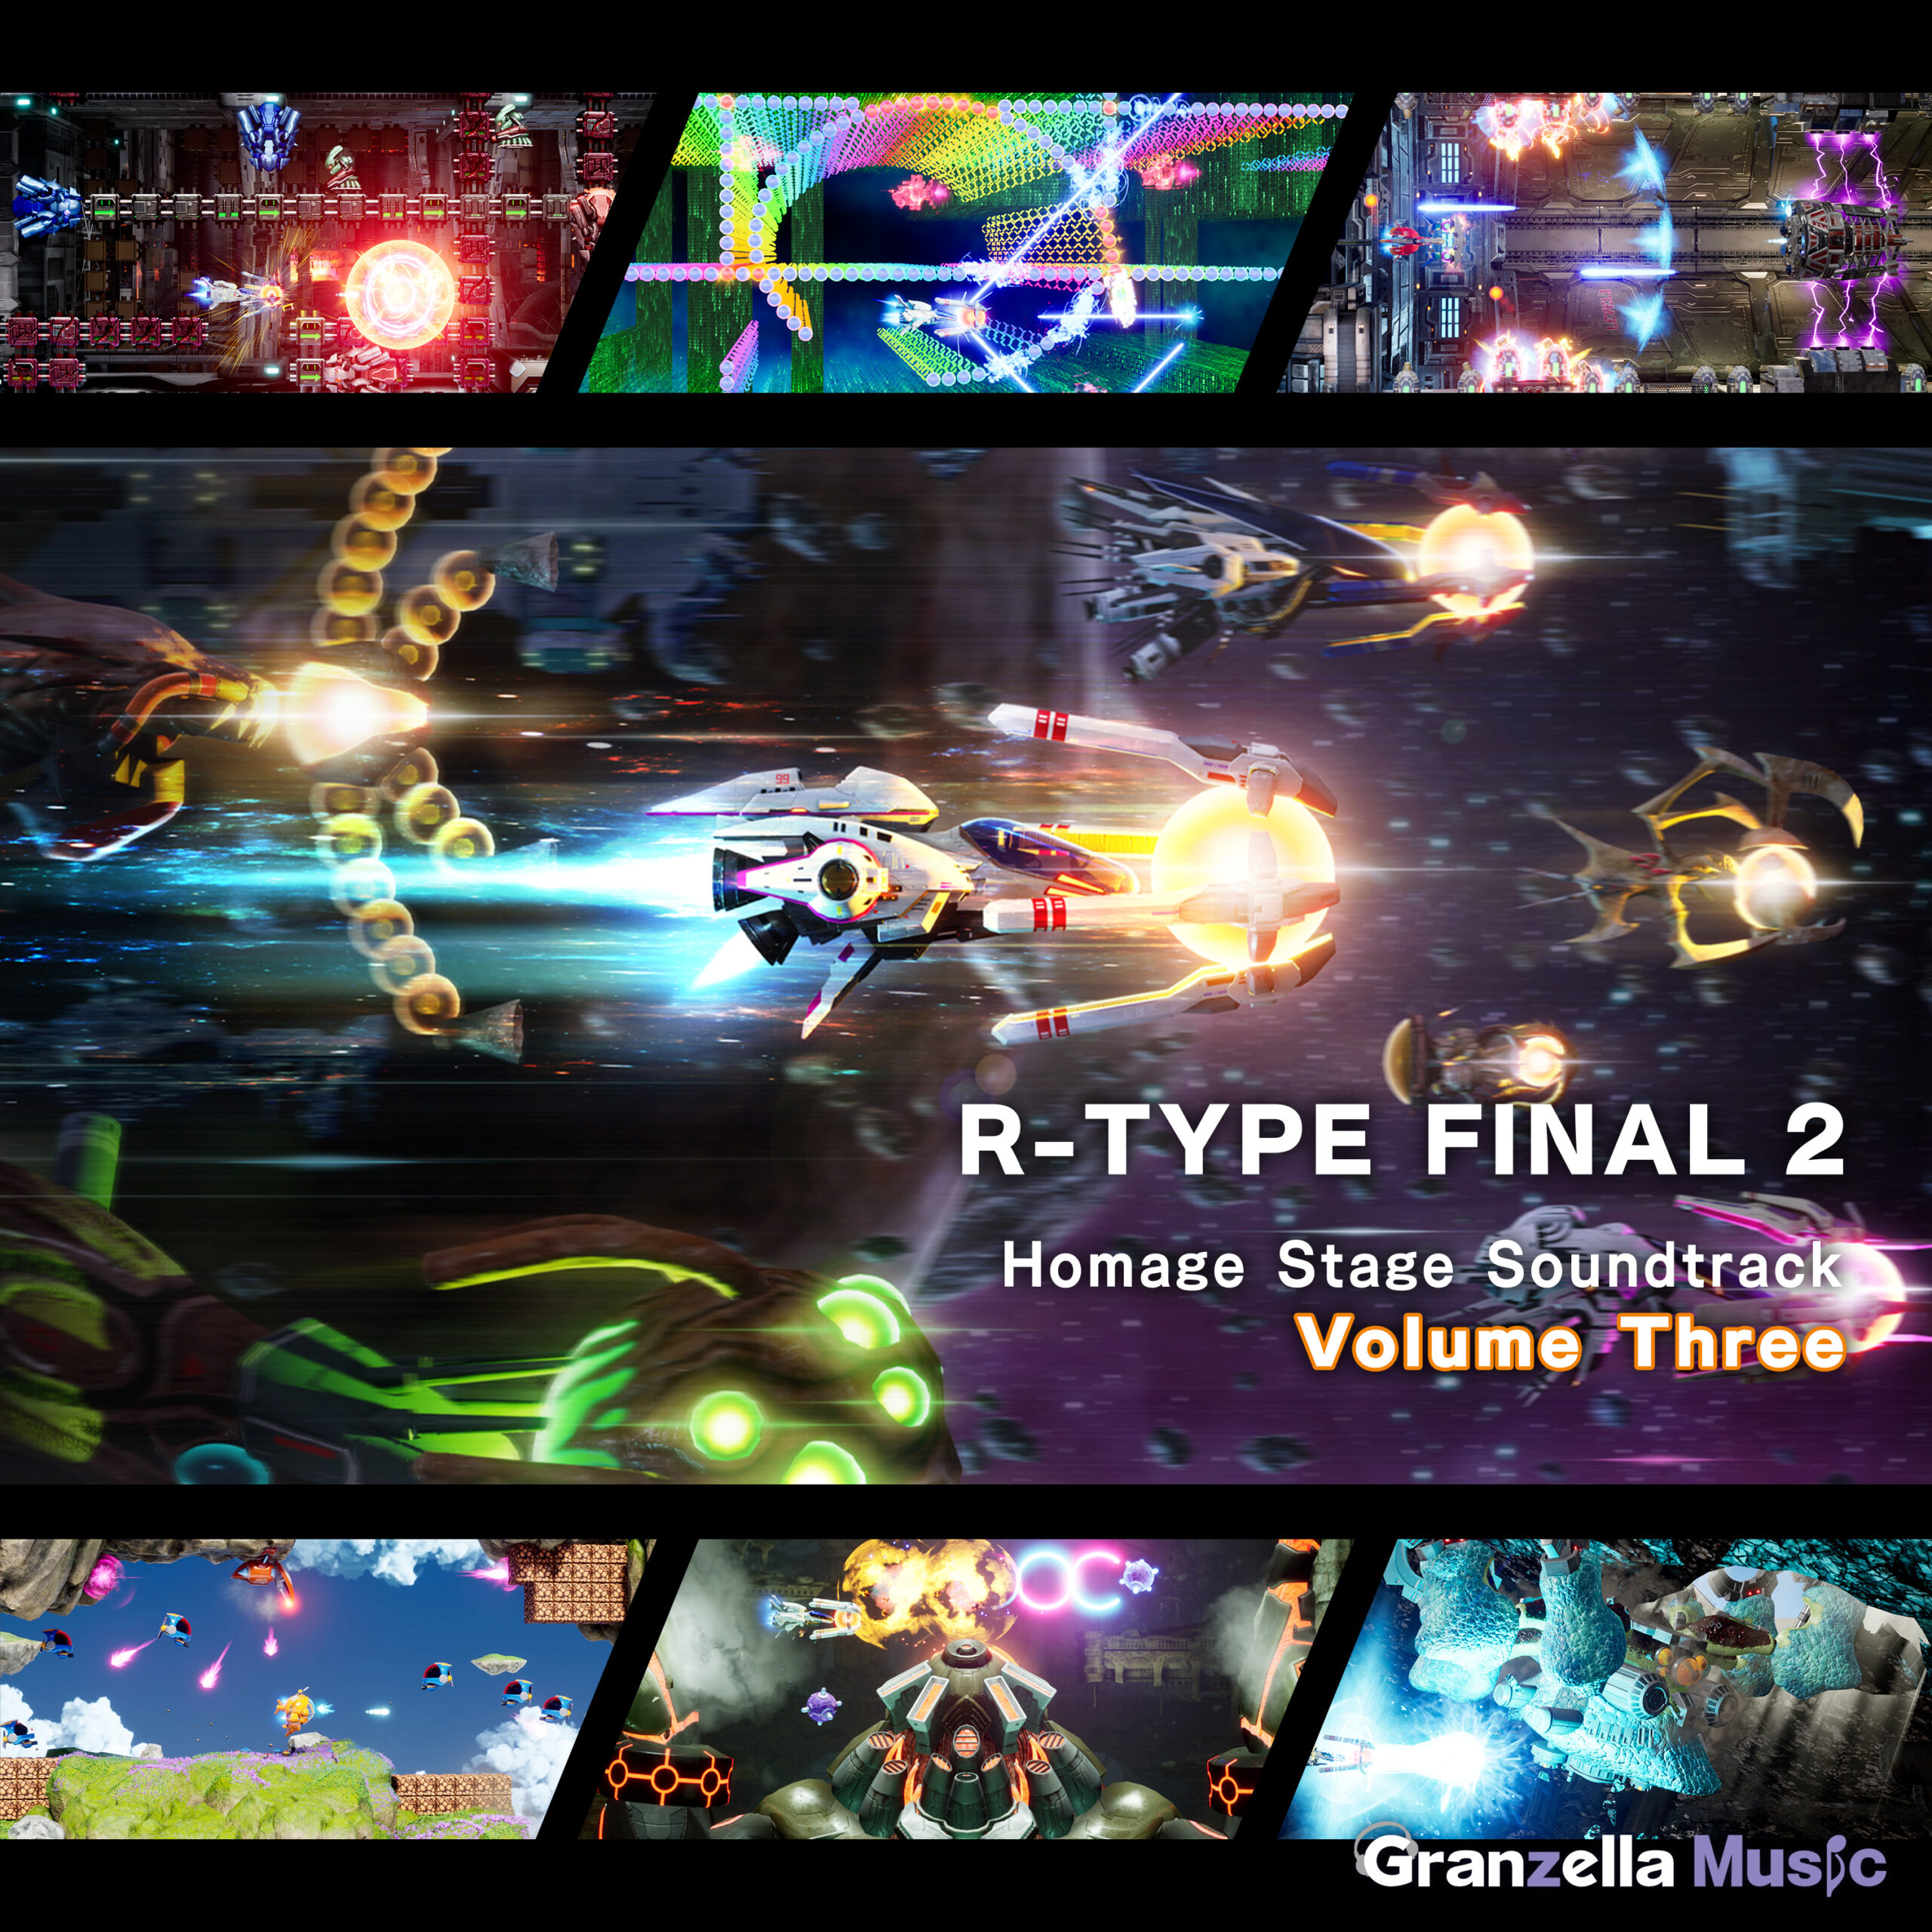 R-TYPE FINAL 2 Homage Stage Soundtrack Volume Three